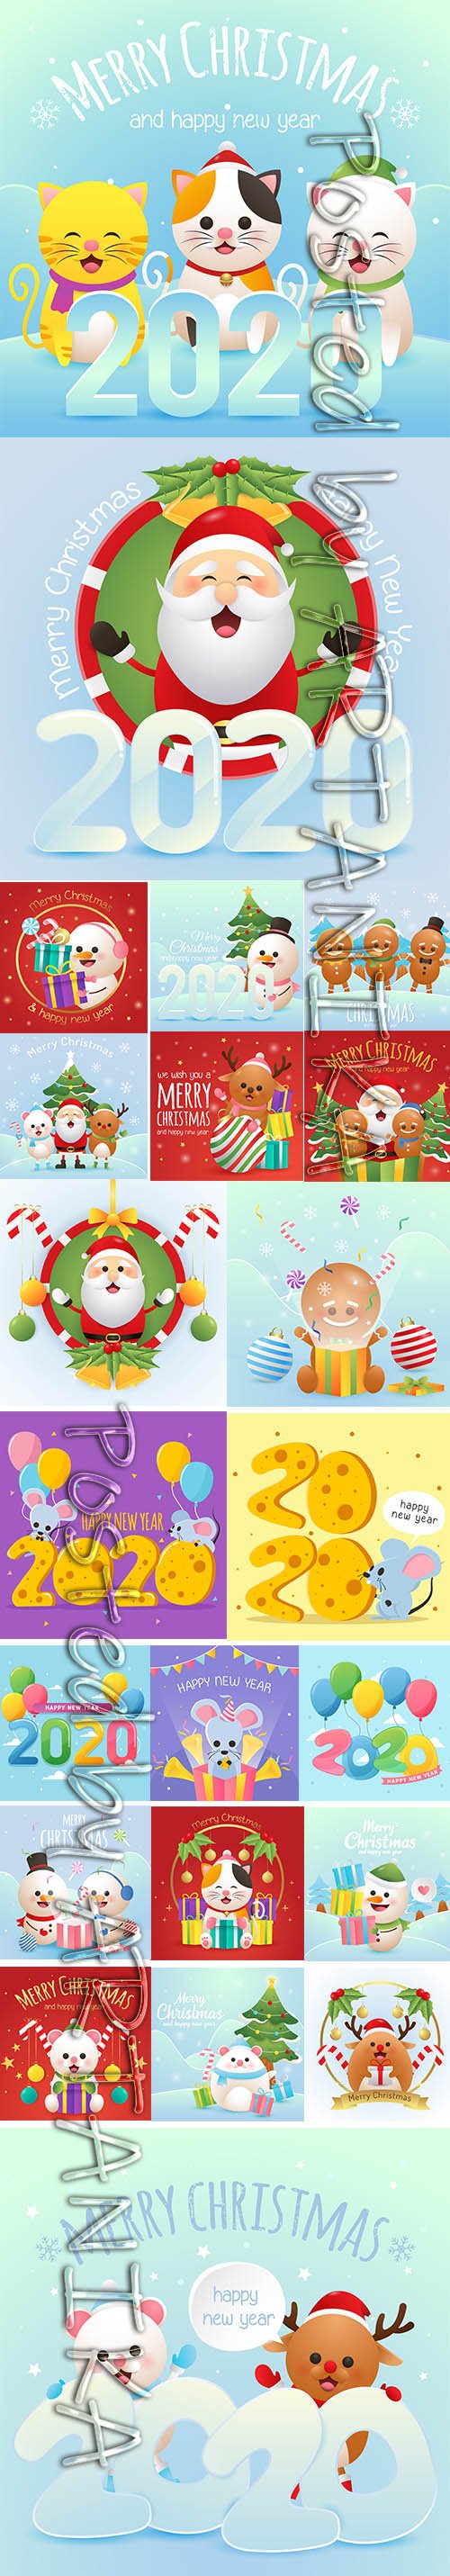 Merry Christmas and Happy New Year Greeting Card Pack